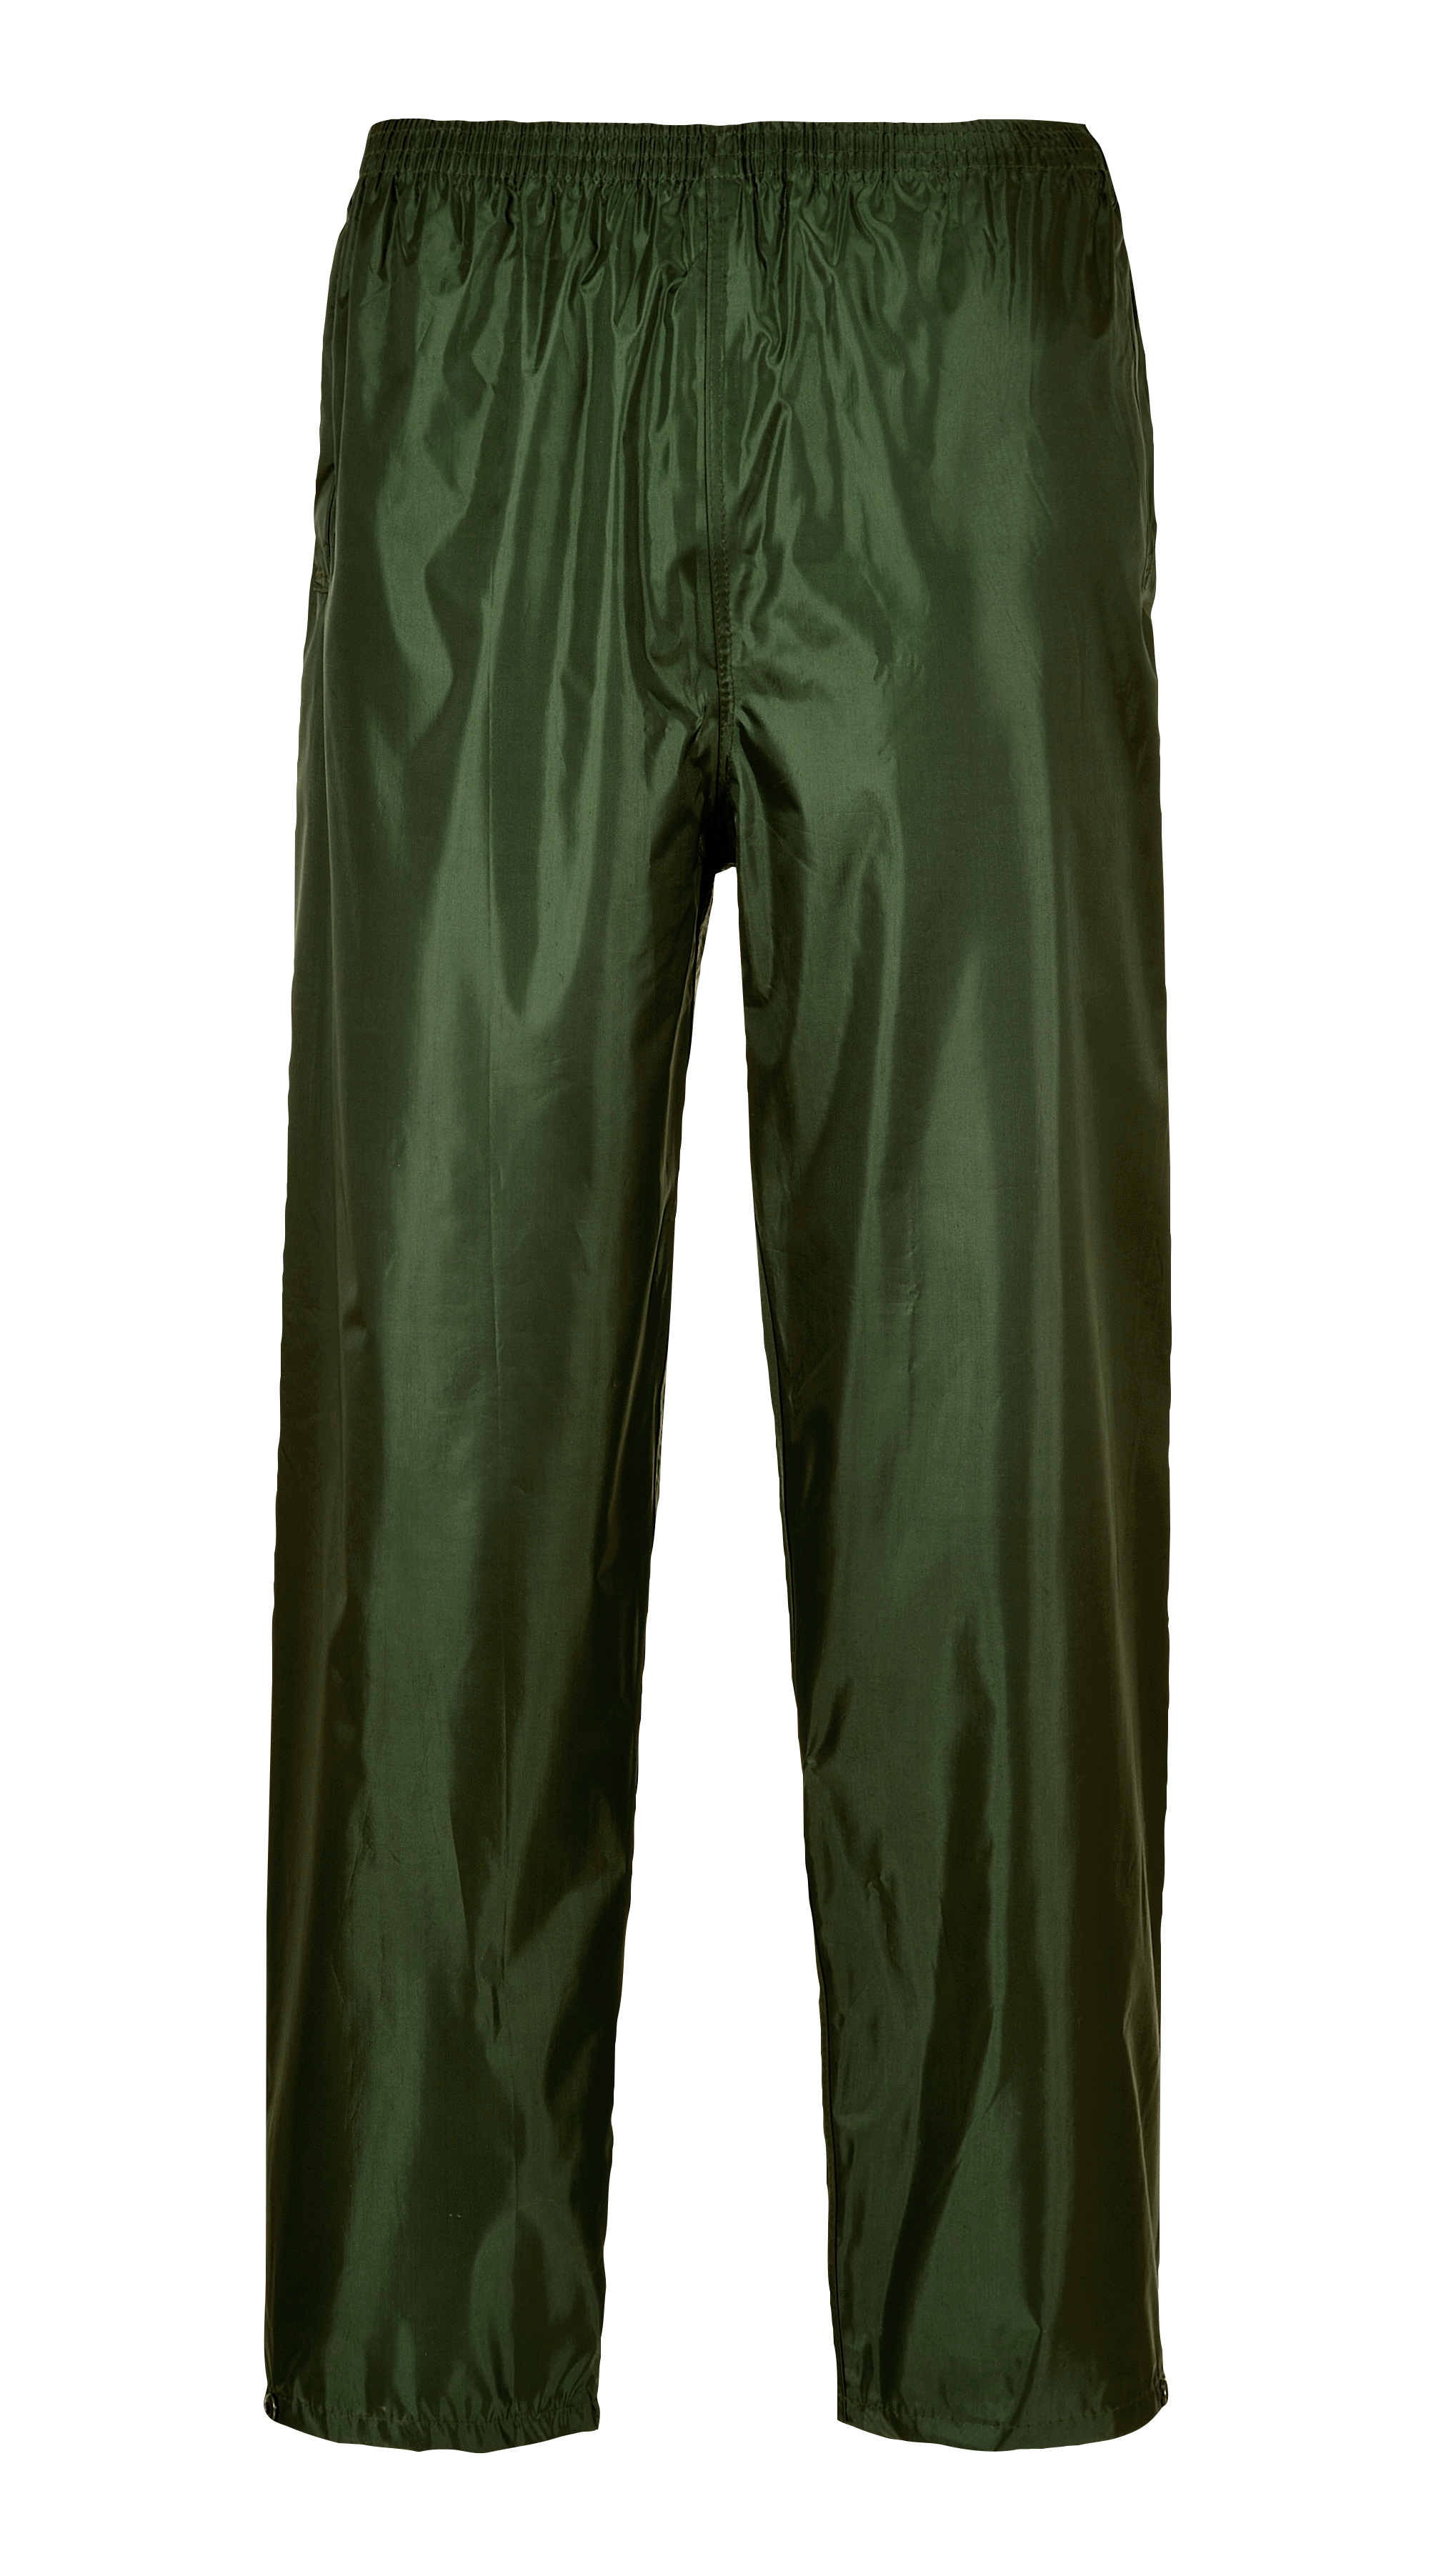 ax-httpss3.eu-west-2.amazonaws.comwebsystemstmp_for_downloadportwest-classic-adult-rain-trousers-olive-green.jpeg